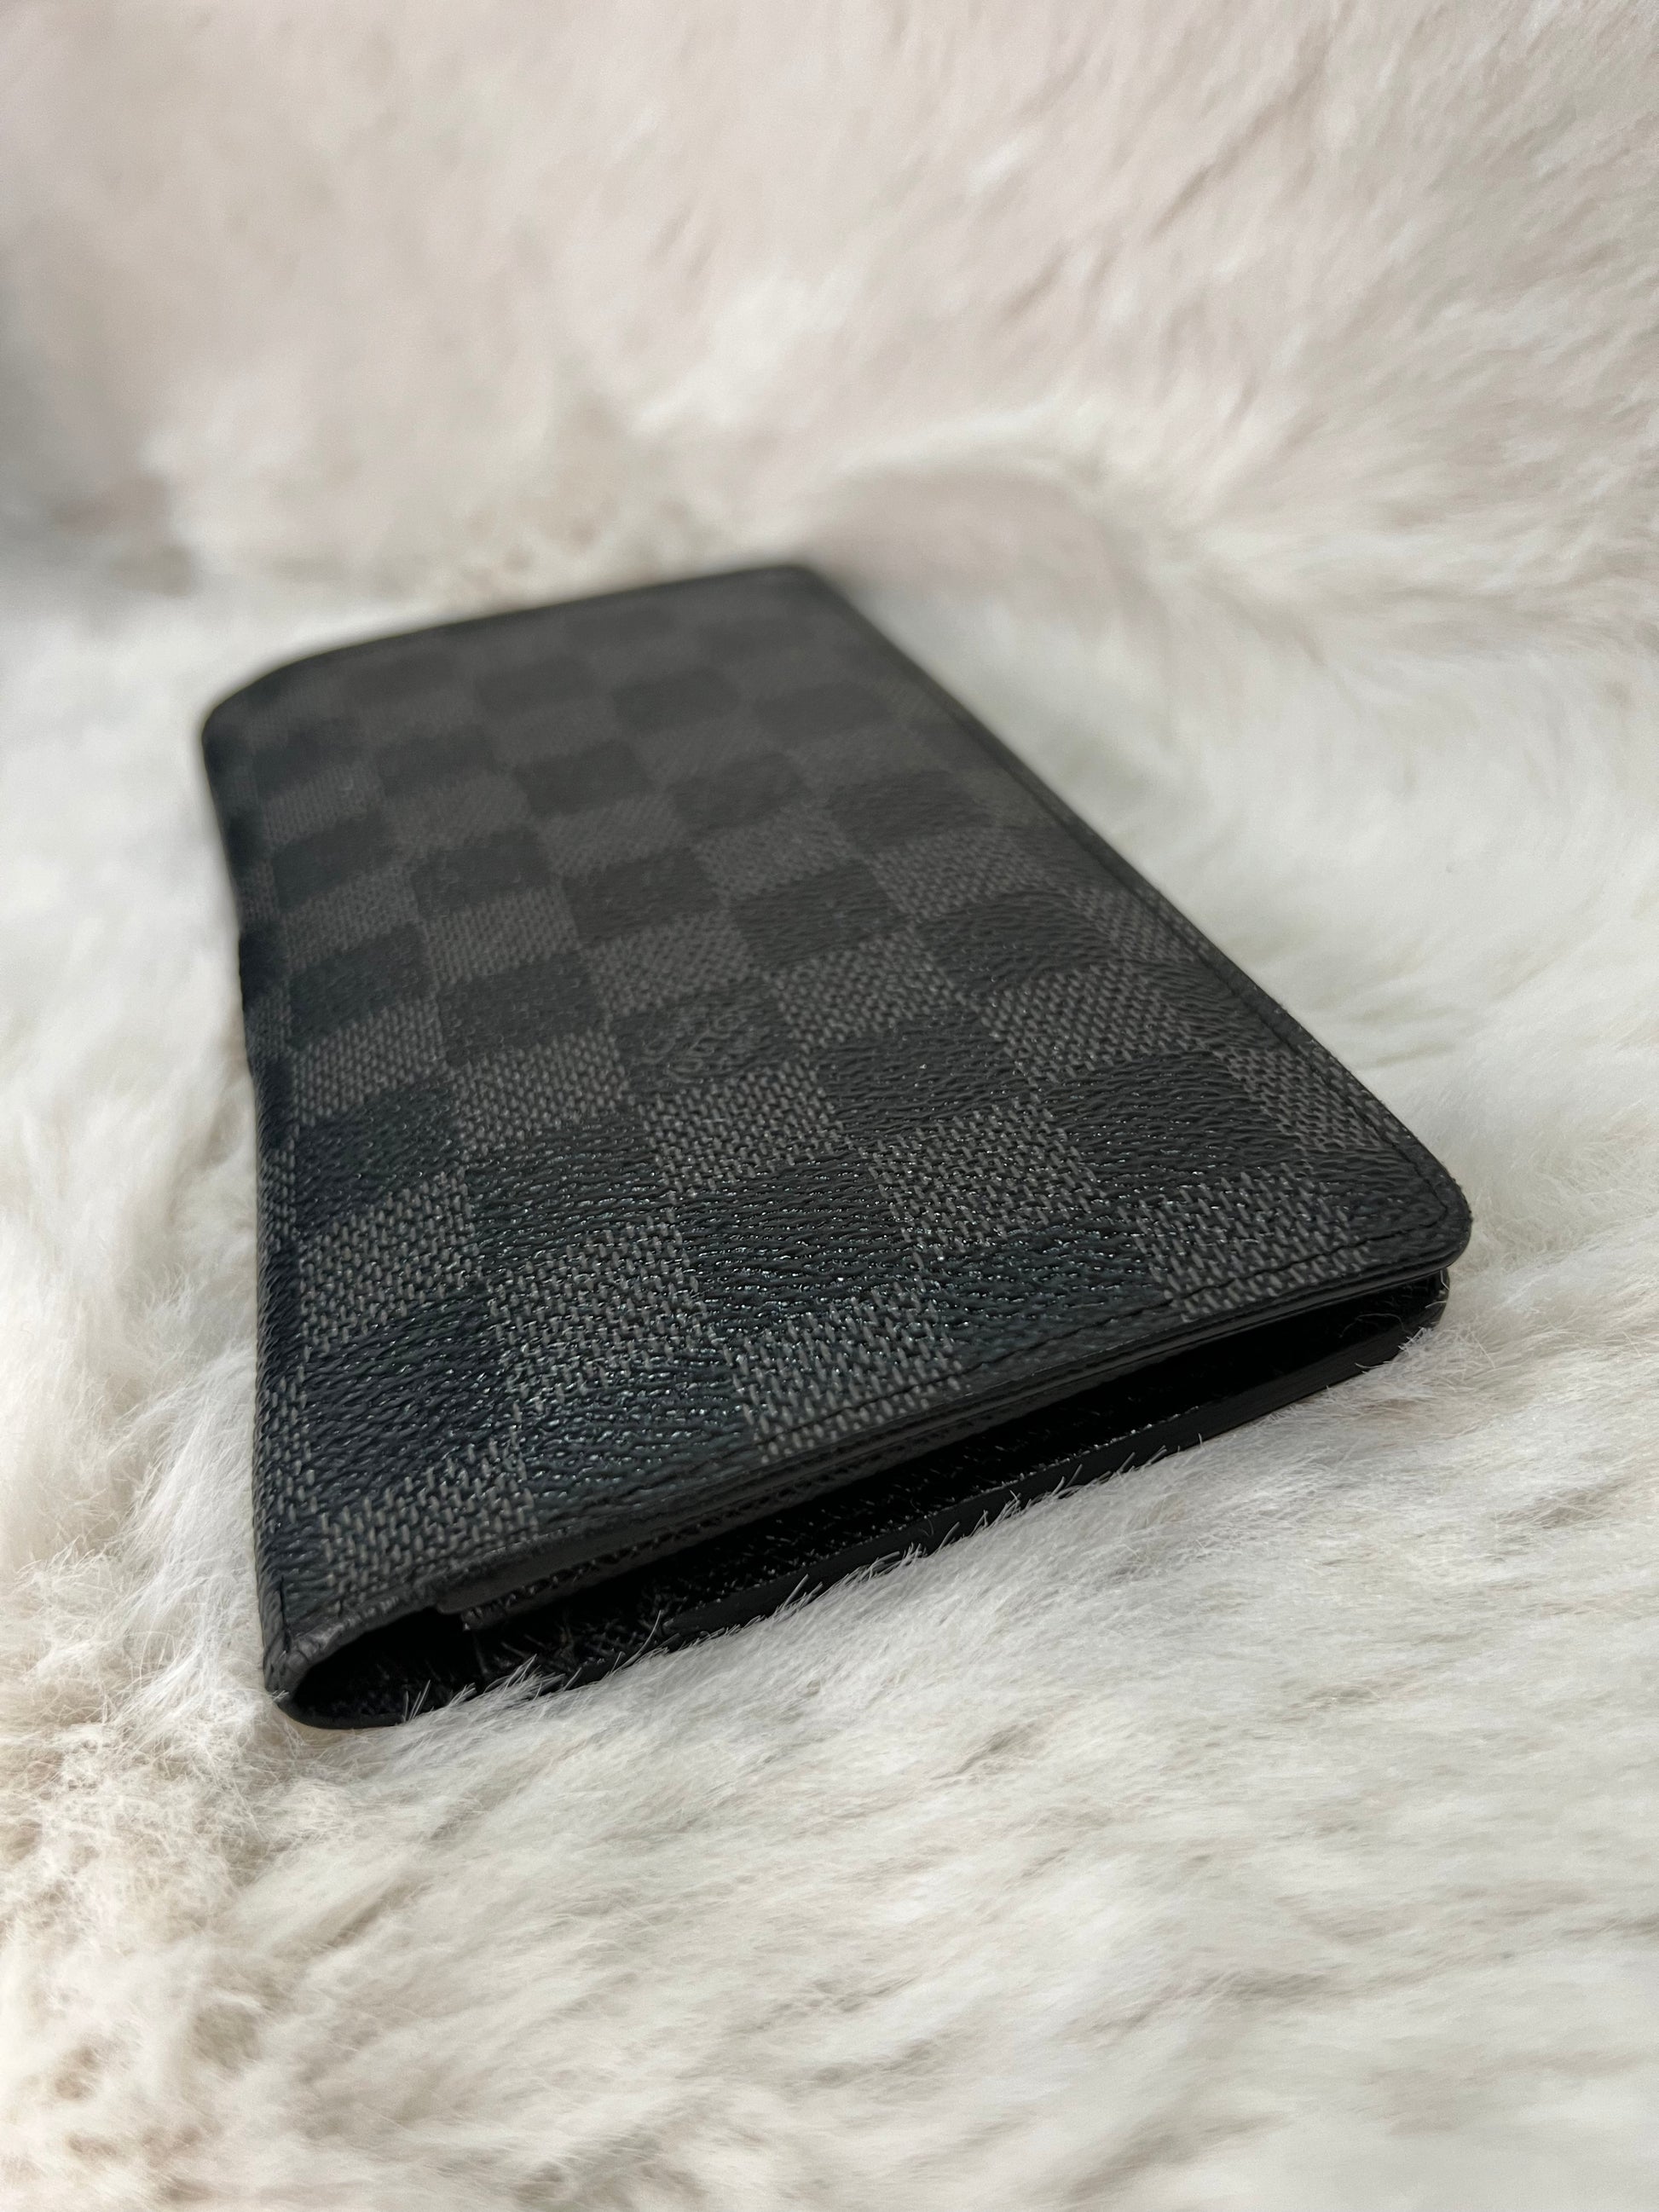 Damier Graphite Portefeuille Brother Wallet - $165 plus $10 shipping – The  Brown Bag Boutique